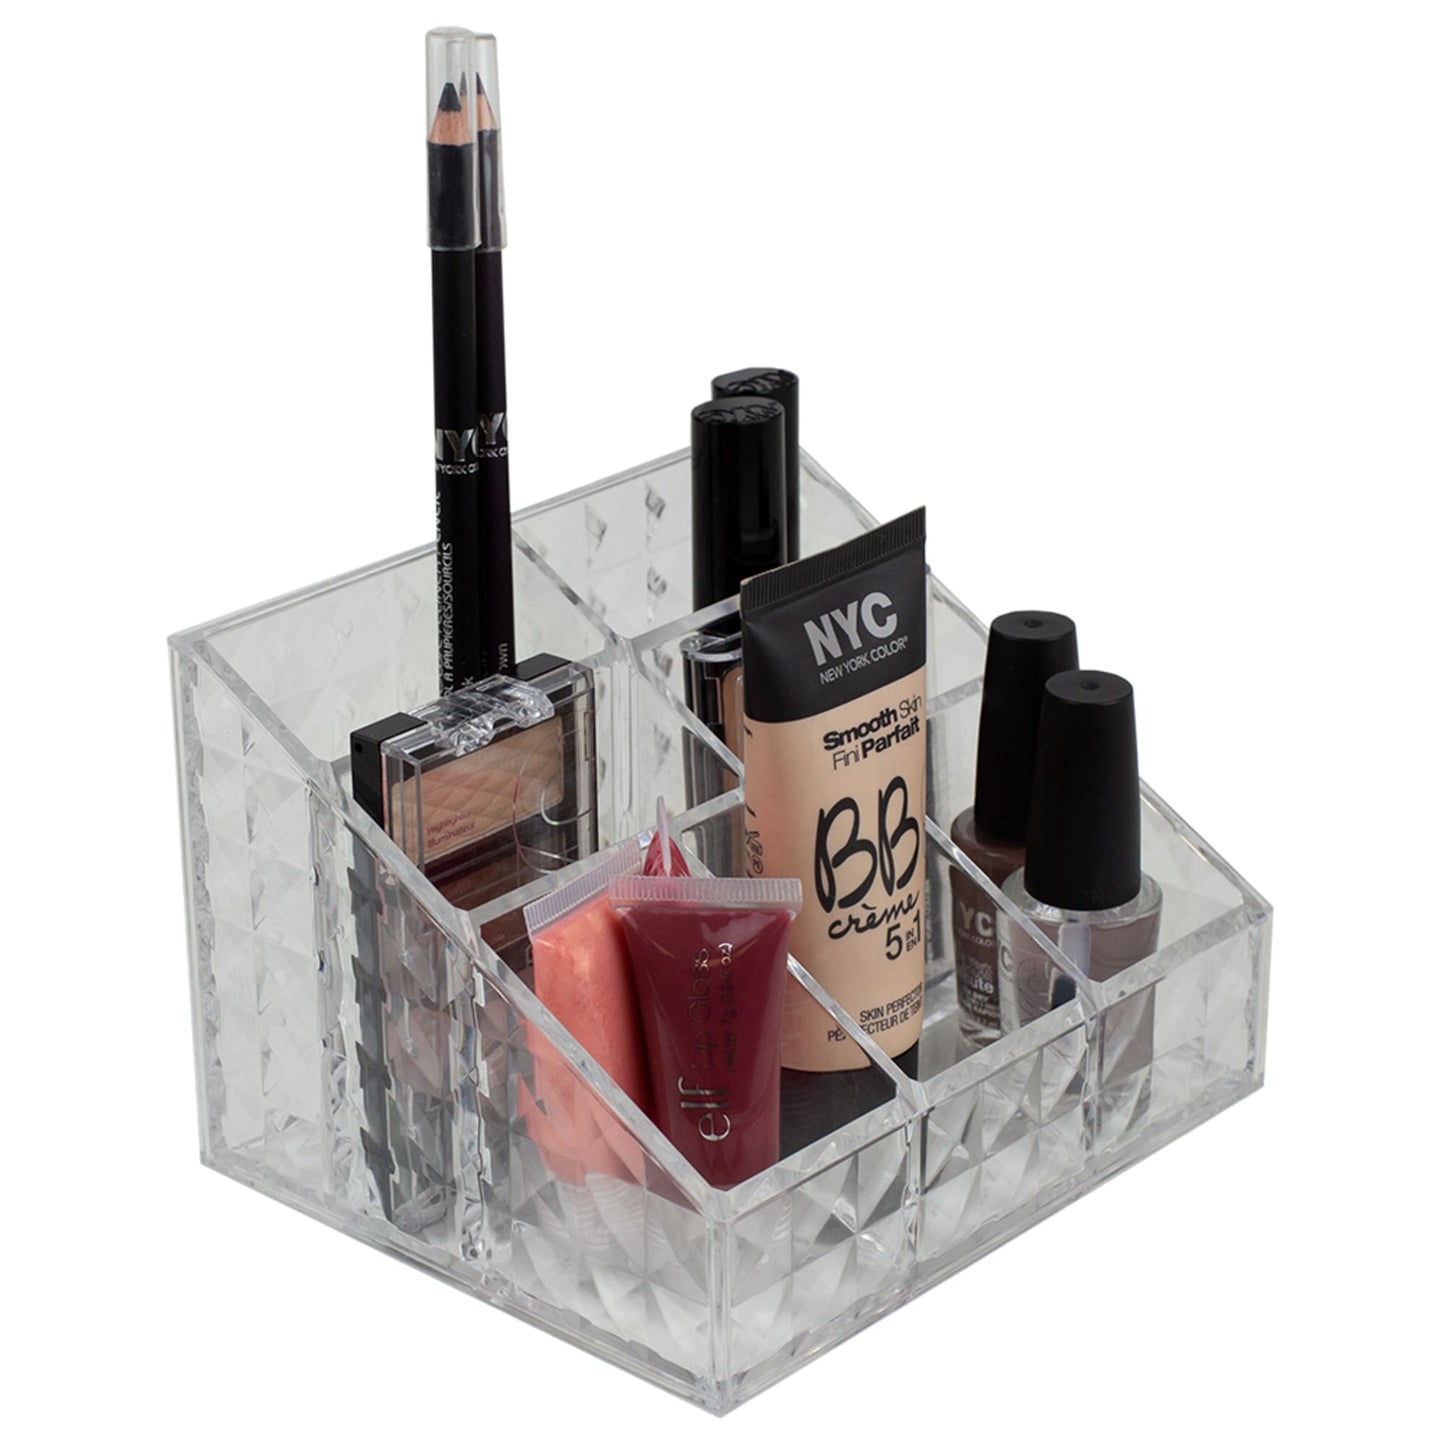 Beveled Shatter-Resistant Plastic 7 Compartment Square Cosmetic Organizer, Clear